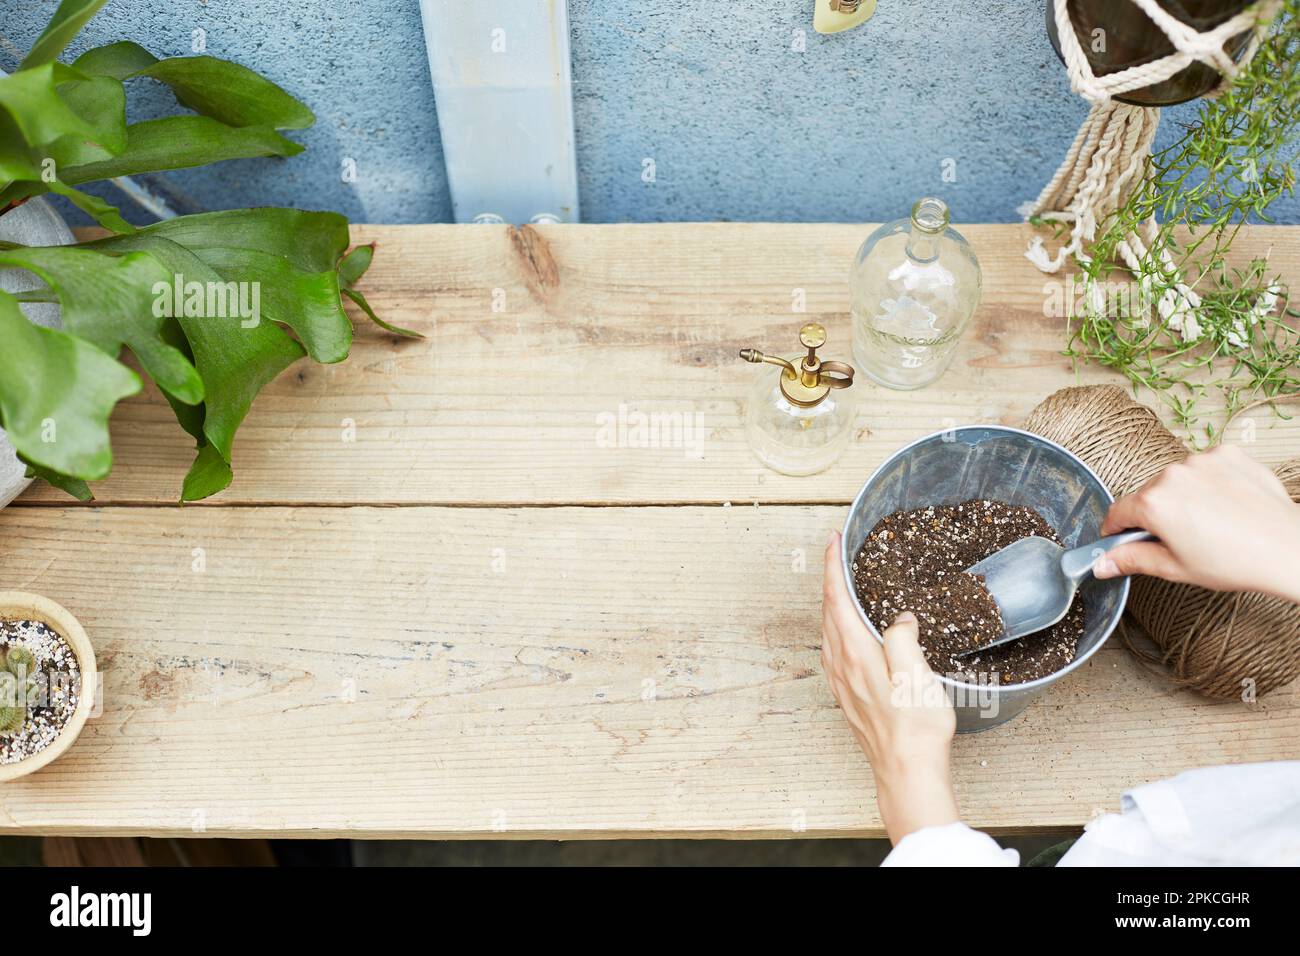 A woman at work scooping up buckets of soil on a workbench Stock Photo